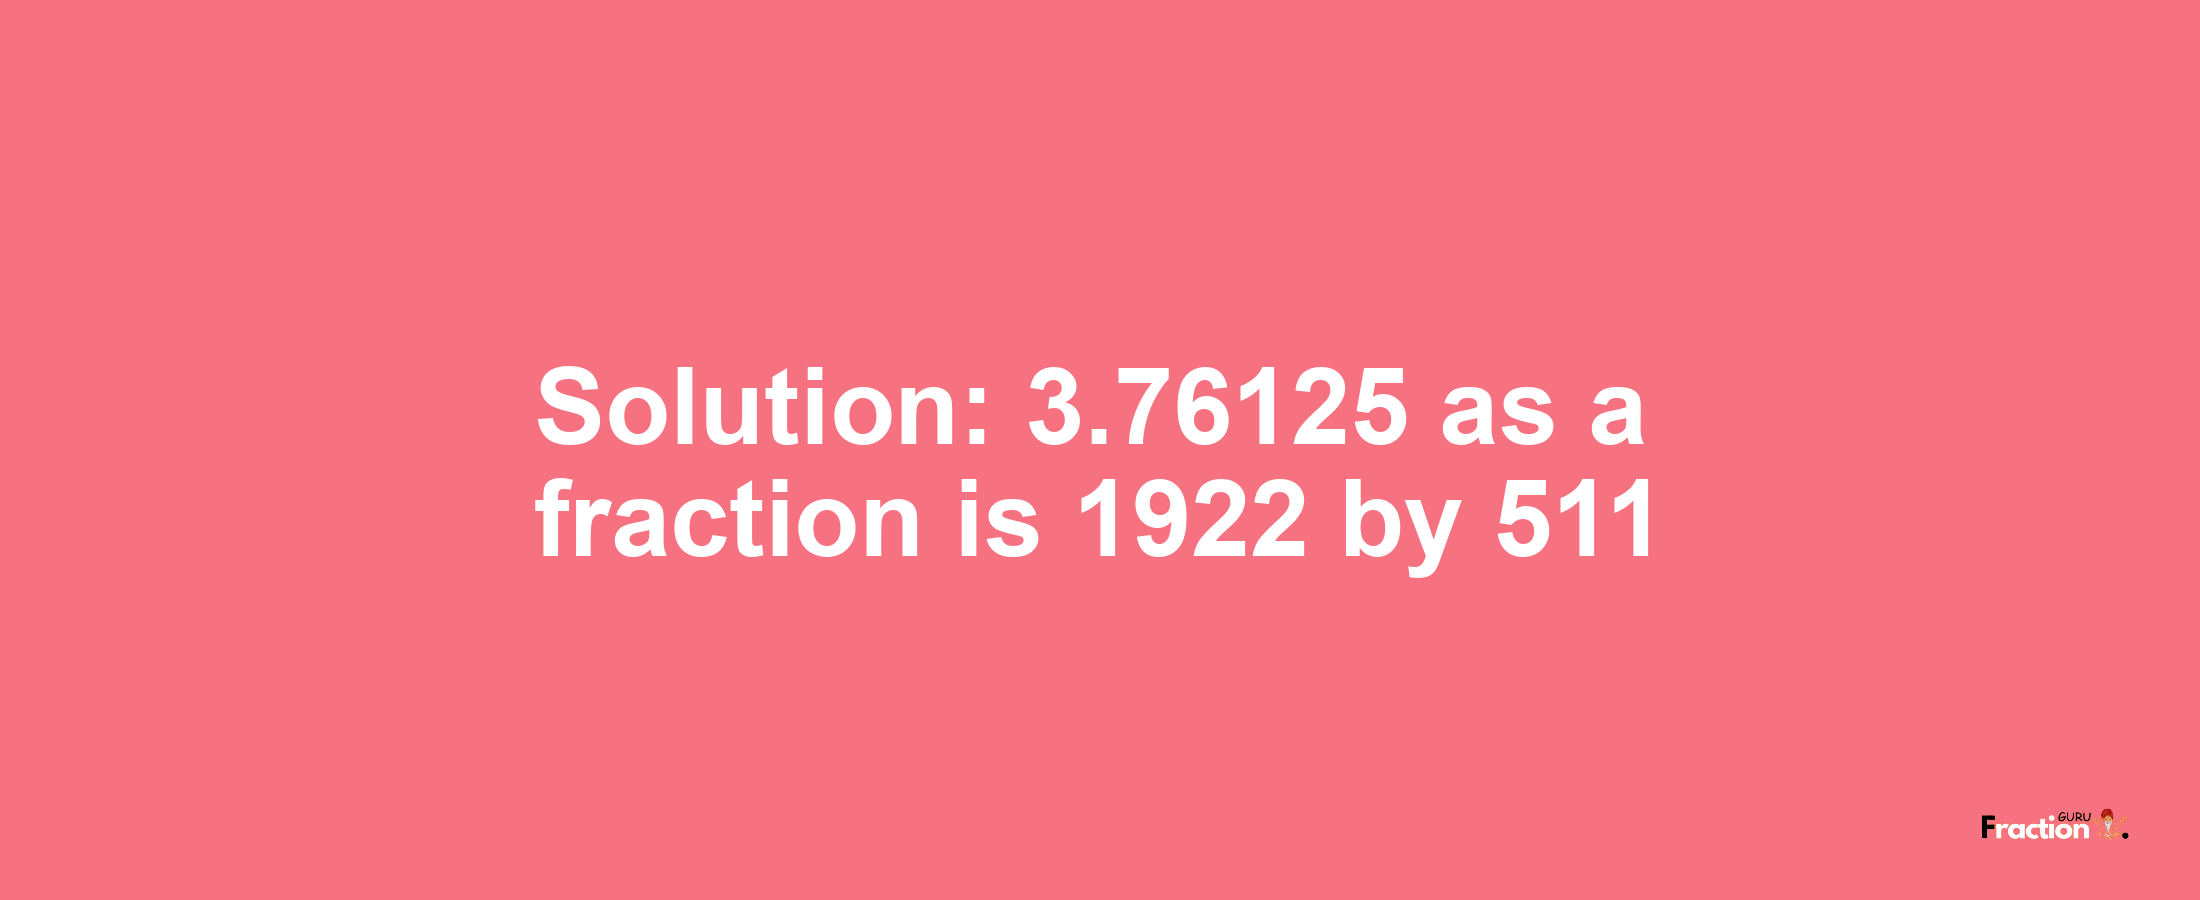 Solution:3.76125 as a fraction is 1922/511